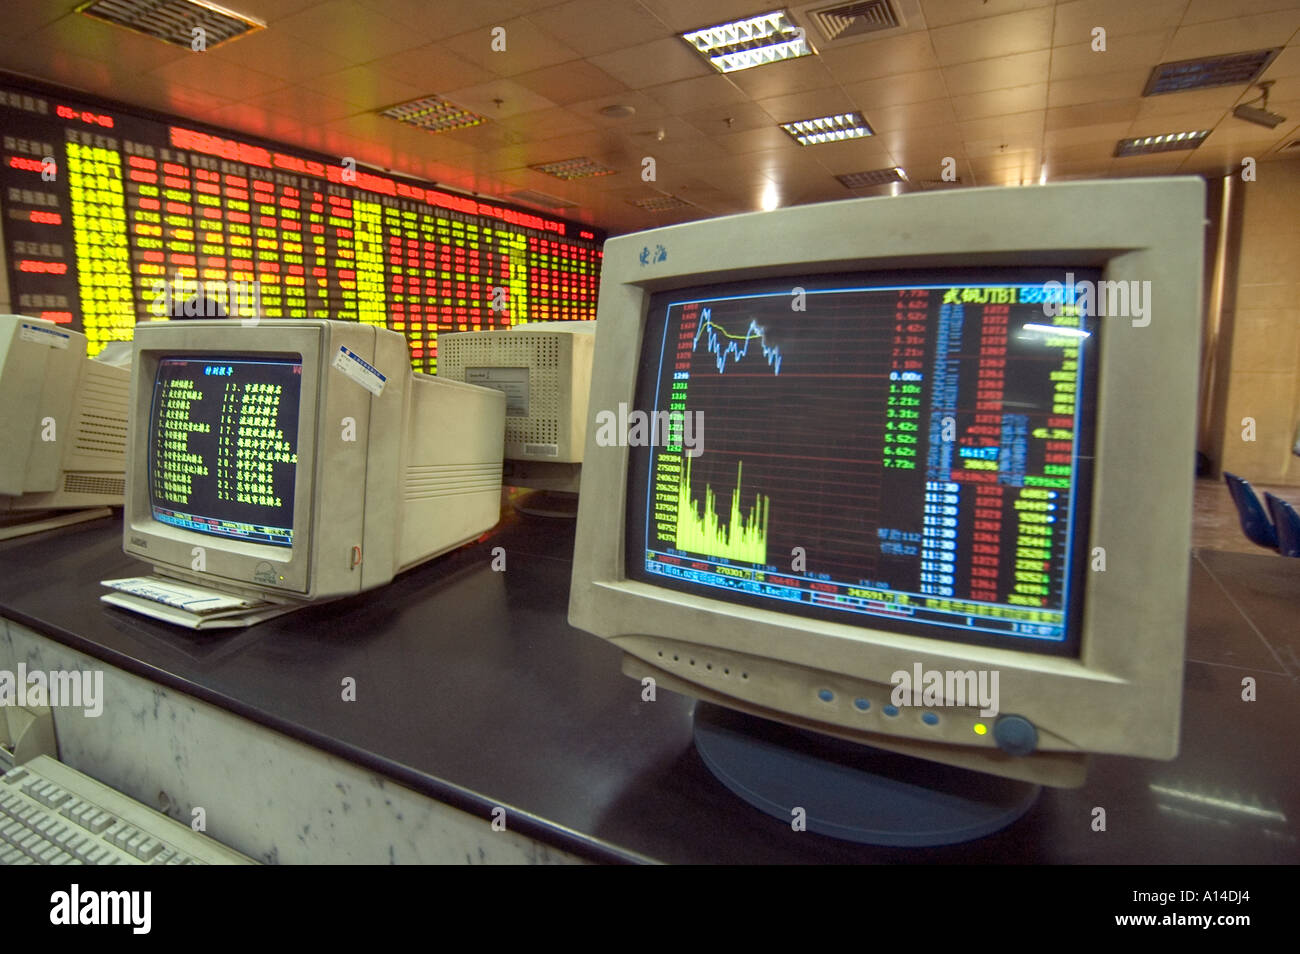 Computer screens displaying chart, graph, and diagram from the Shanghai stock market exchange. Stock Photo